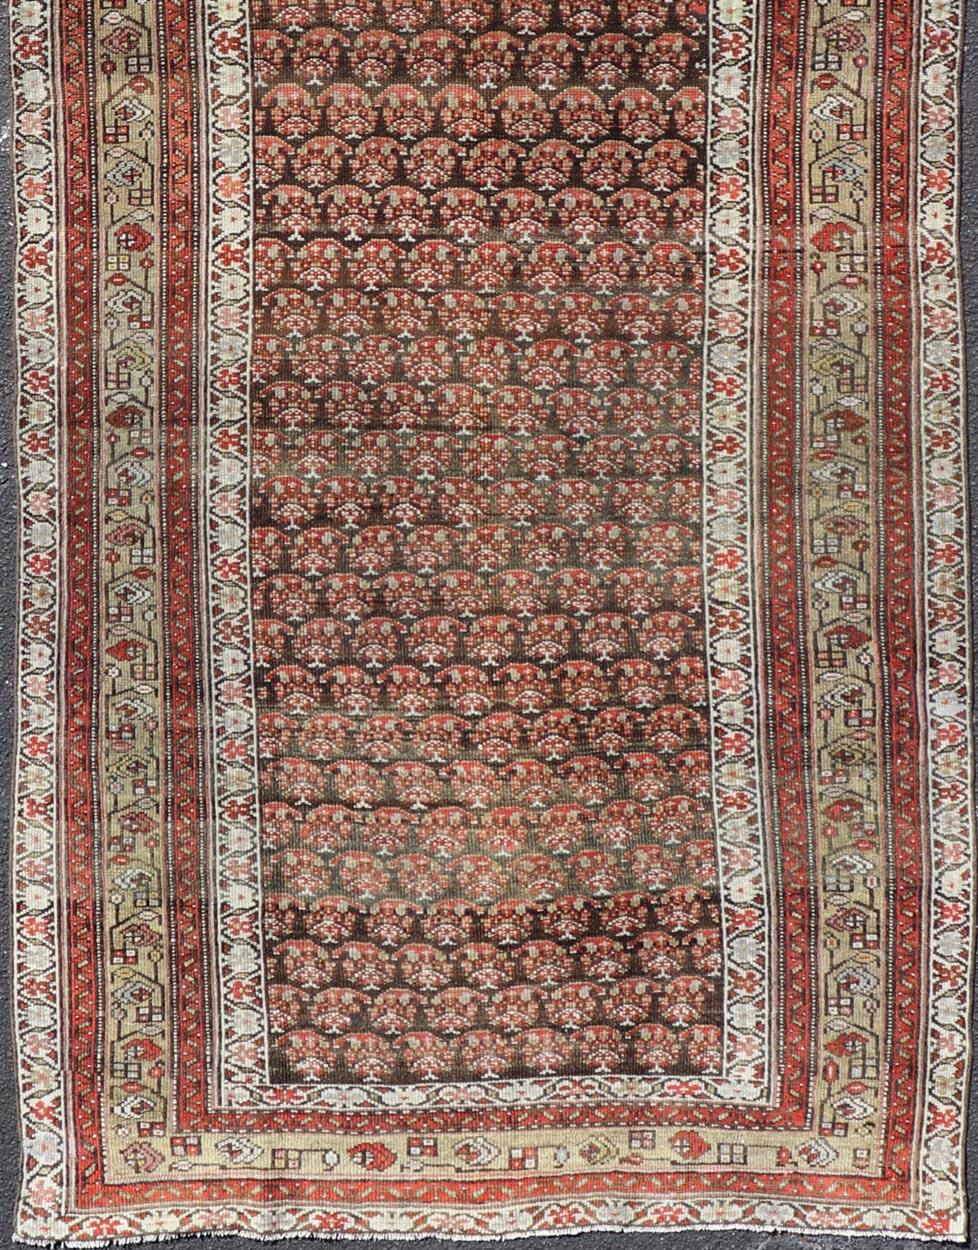 Antique Kurdish Gallery Runner with All-Over Paisley Design in Brown, Red, Green In Good Condition For Sale In Atlanta, GA